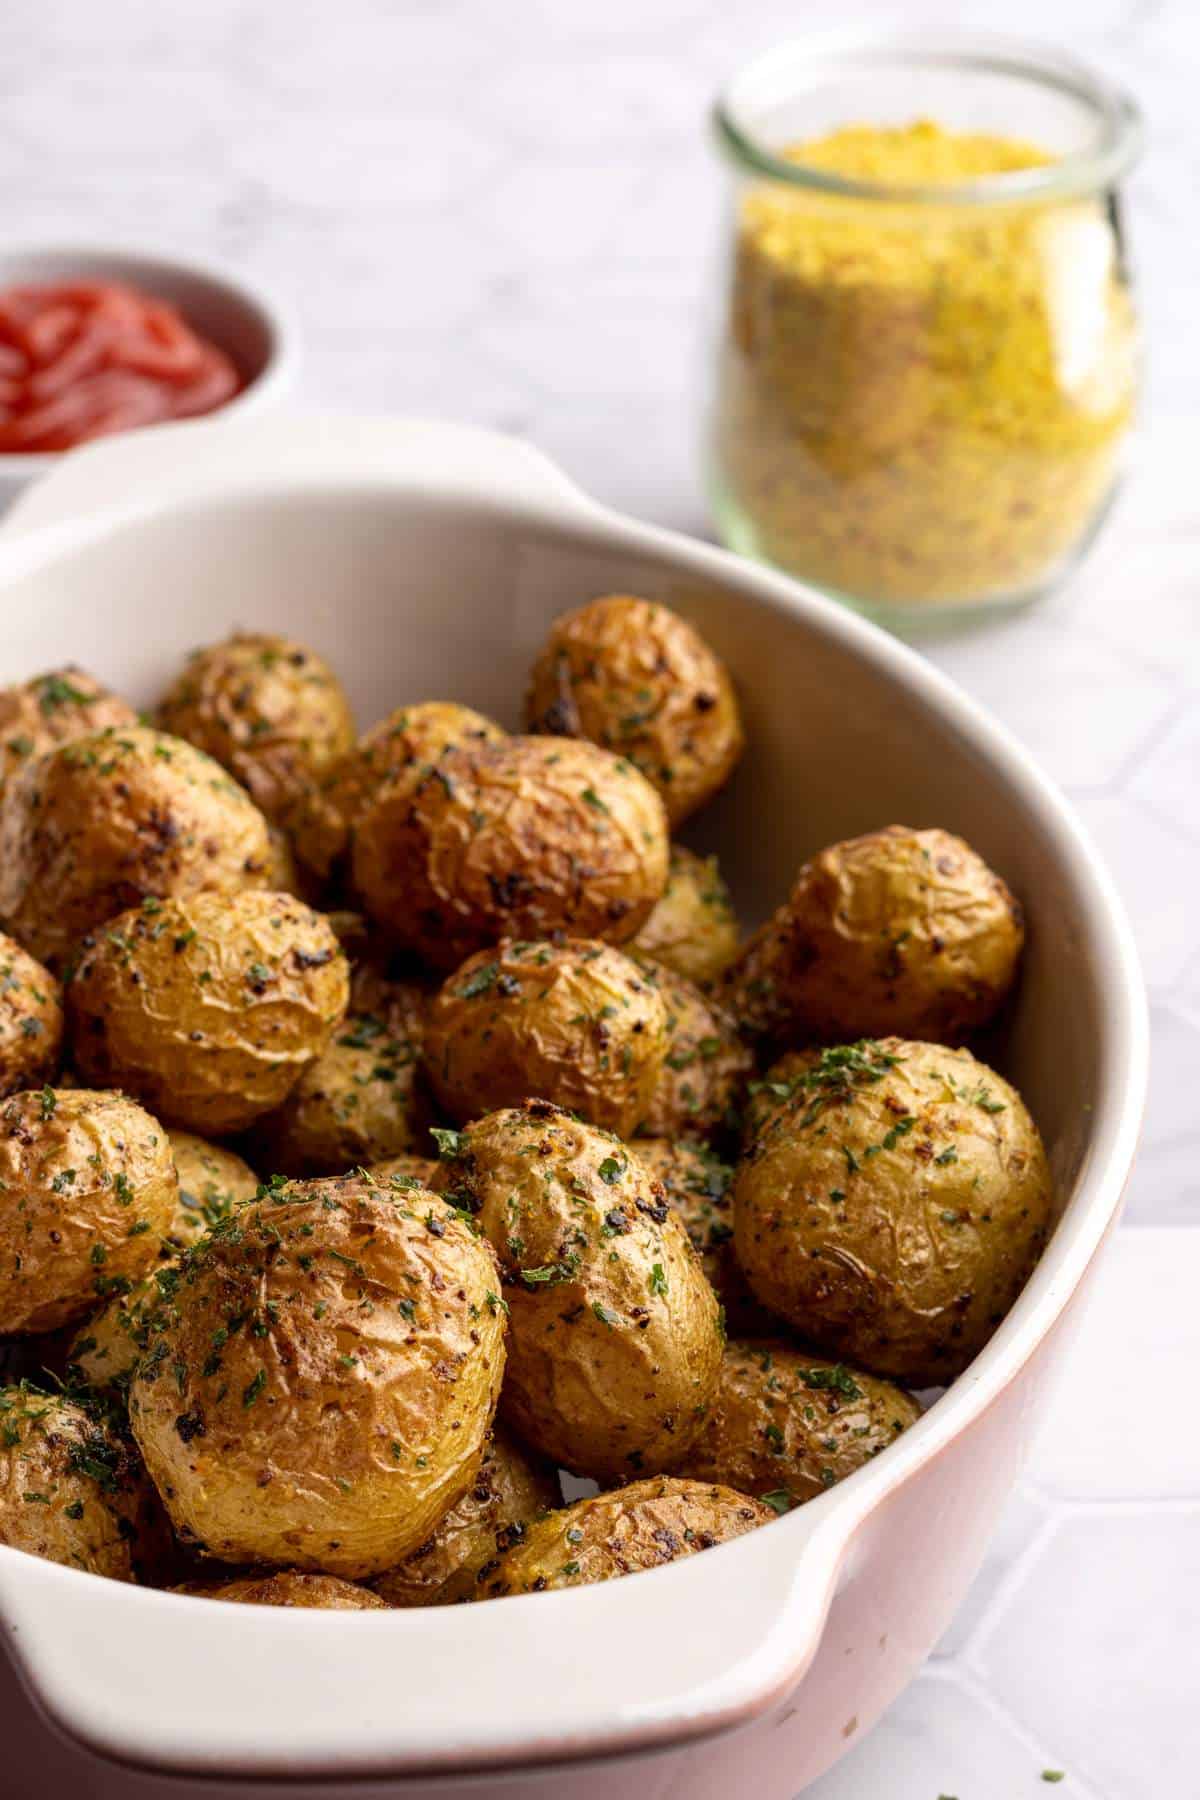 Oven roasted potatoes in a baking dish.